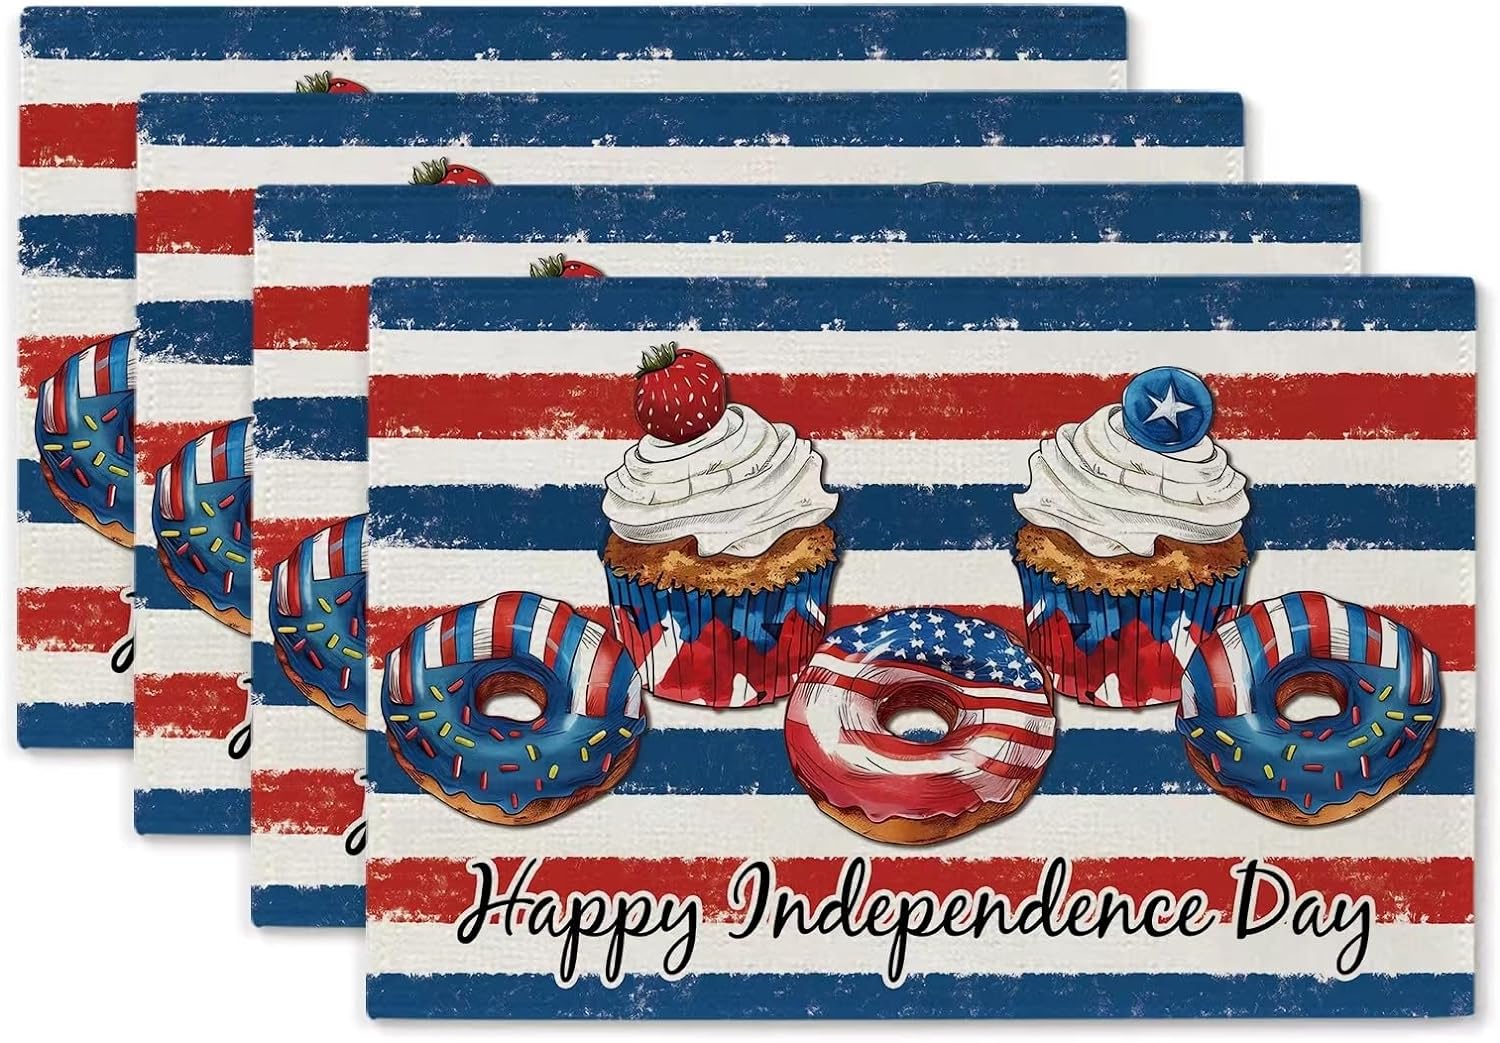 GPGHE 4th of July Placemats Set of 4 Stripe Cake Donut Happy Independence Day Patriotic Memorial Day Table Mats Banquet Home Party Kitchen Dining Decor 12×18 Inch